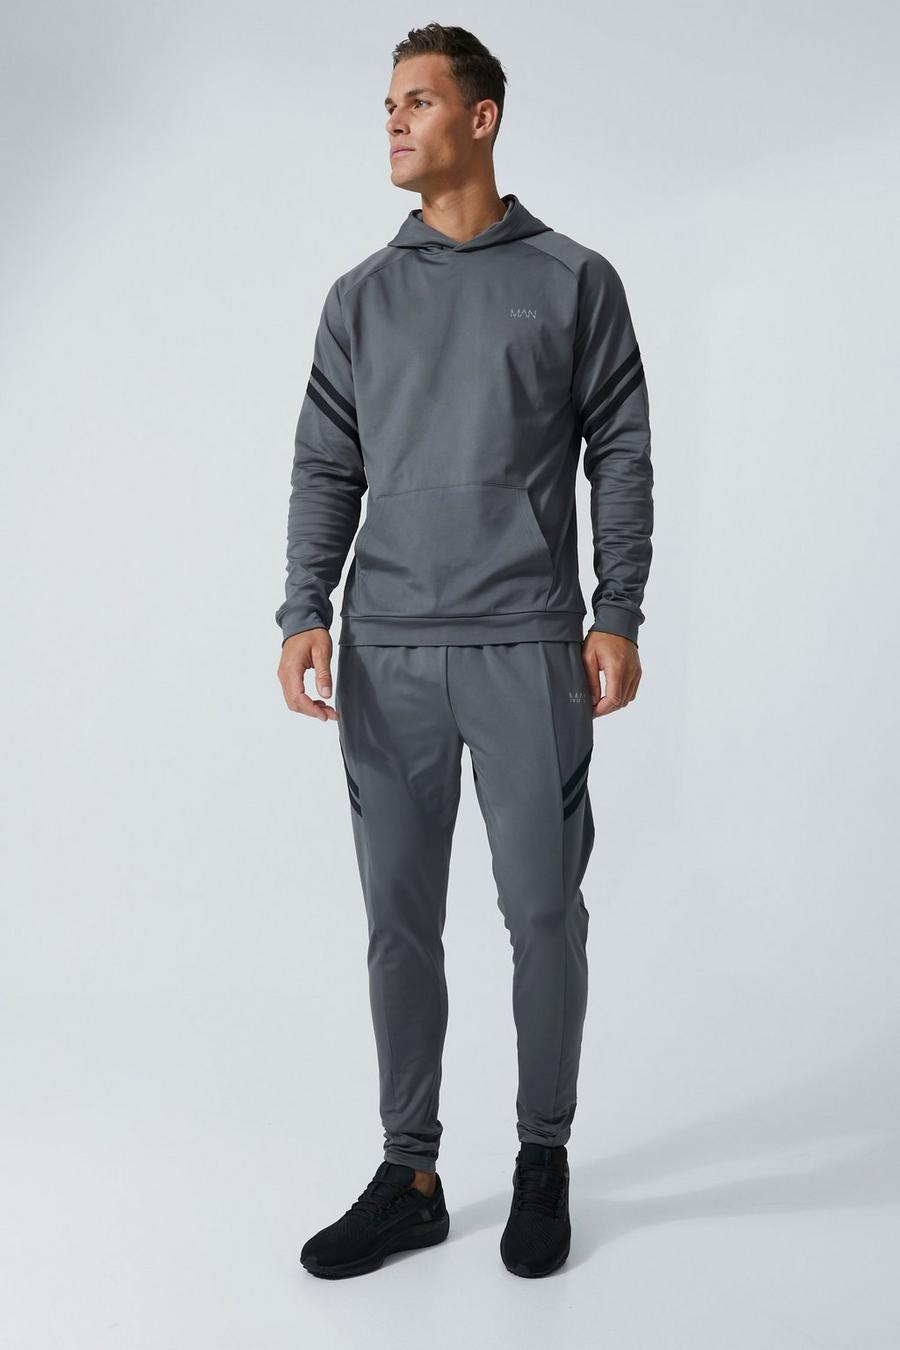 Charcoal grey Tall Man Active Training ¼ Zip Hoodie Tracksuit